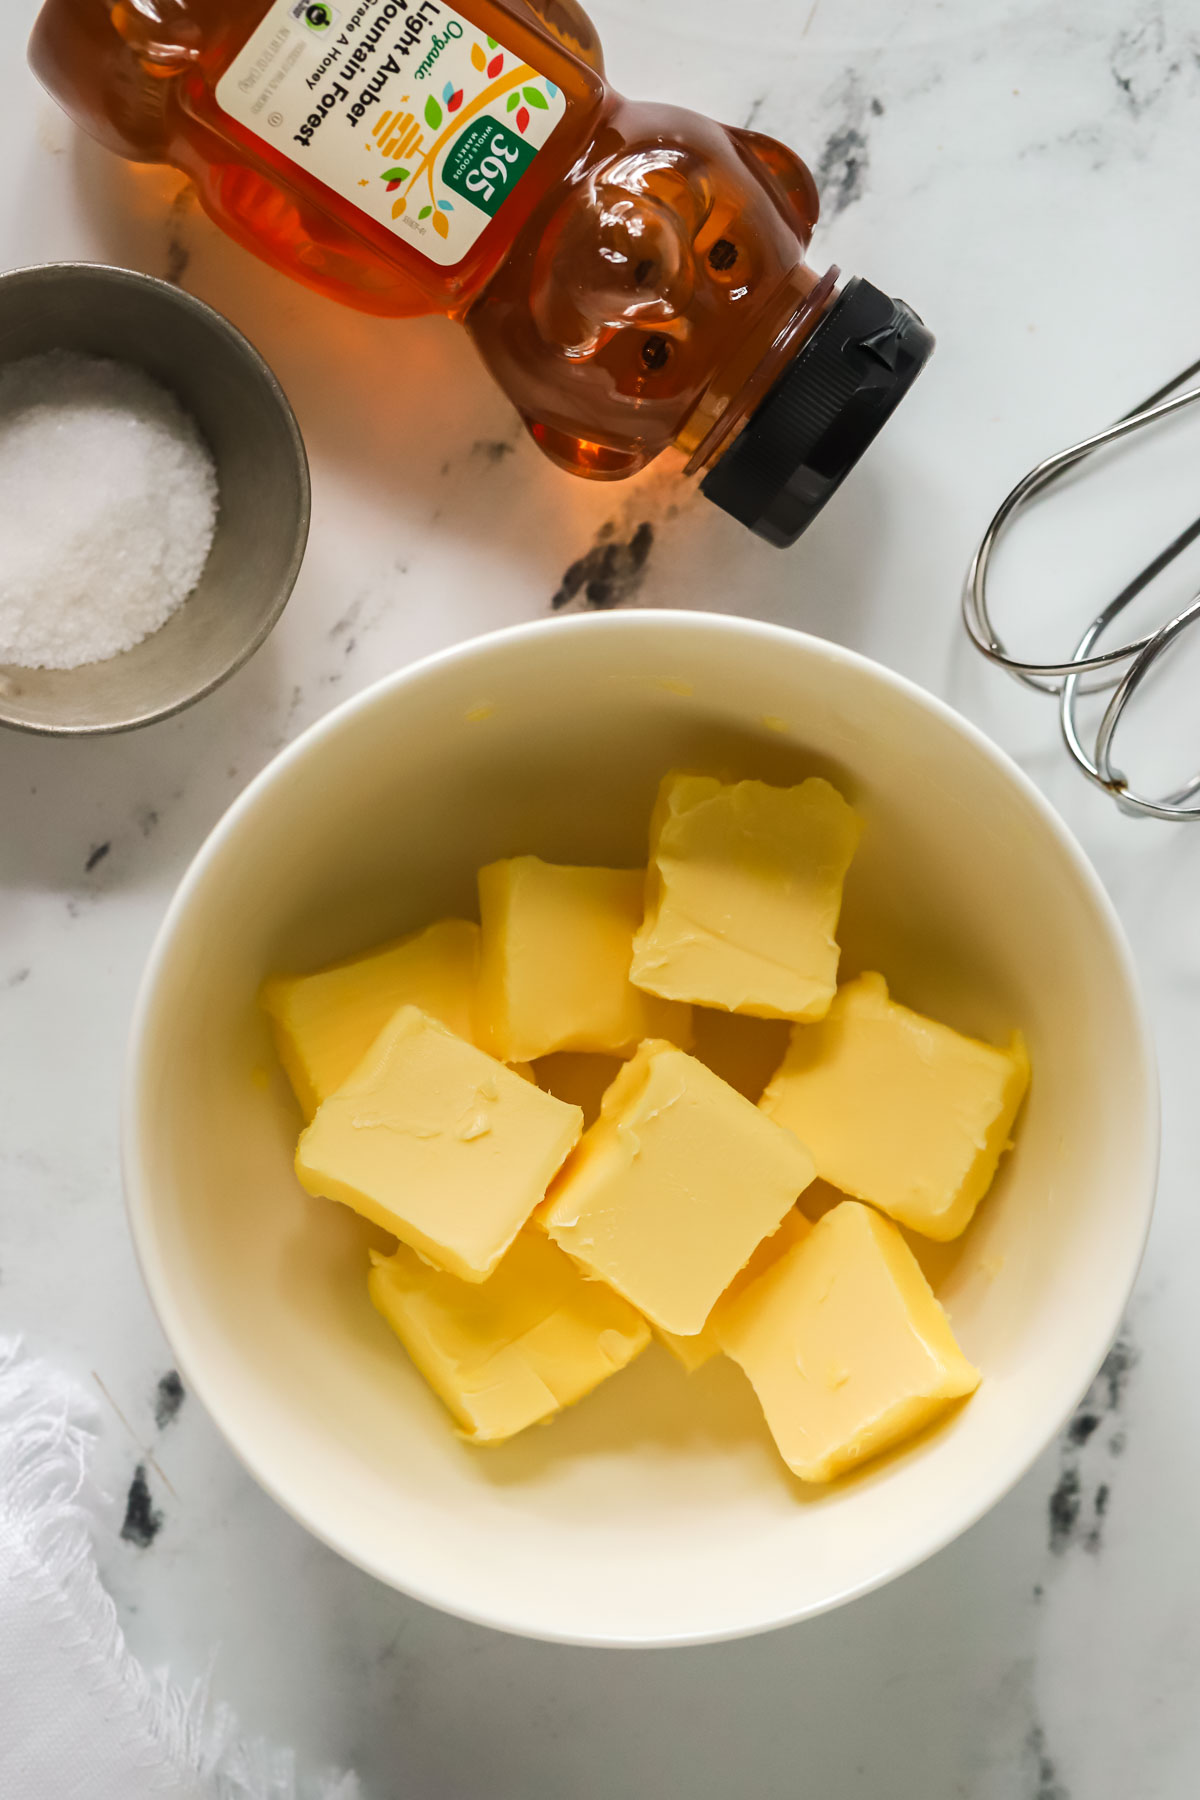 bowl of cubed butter, a honey bear, and a dish of salt